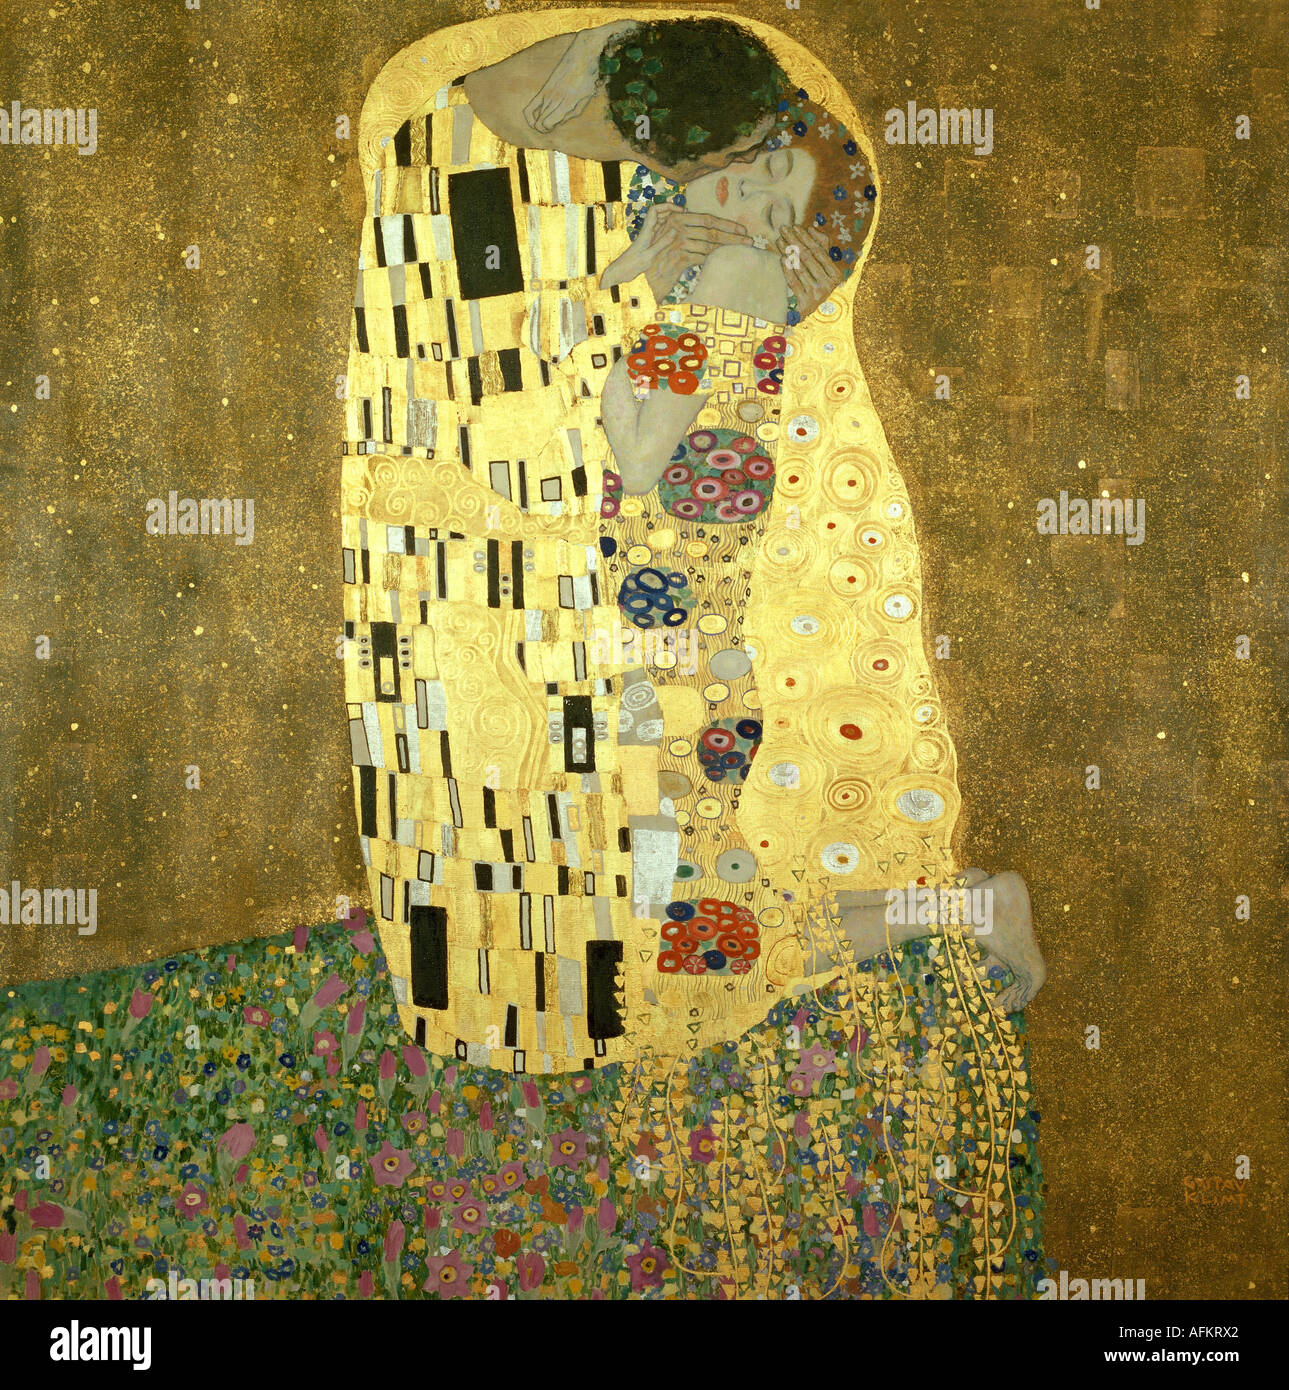 "fine arts, Klimt, Gustav, (1862 - 1918), painting, "Der Kuss", ("the kiss"), 1907 - 1908, oil, silver and gold on canvas, 1 Stock Photo